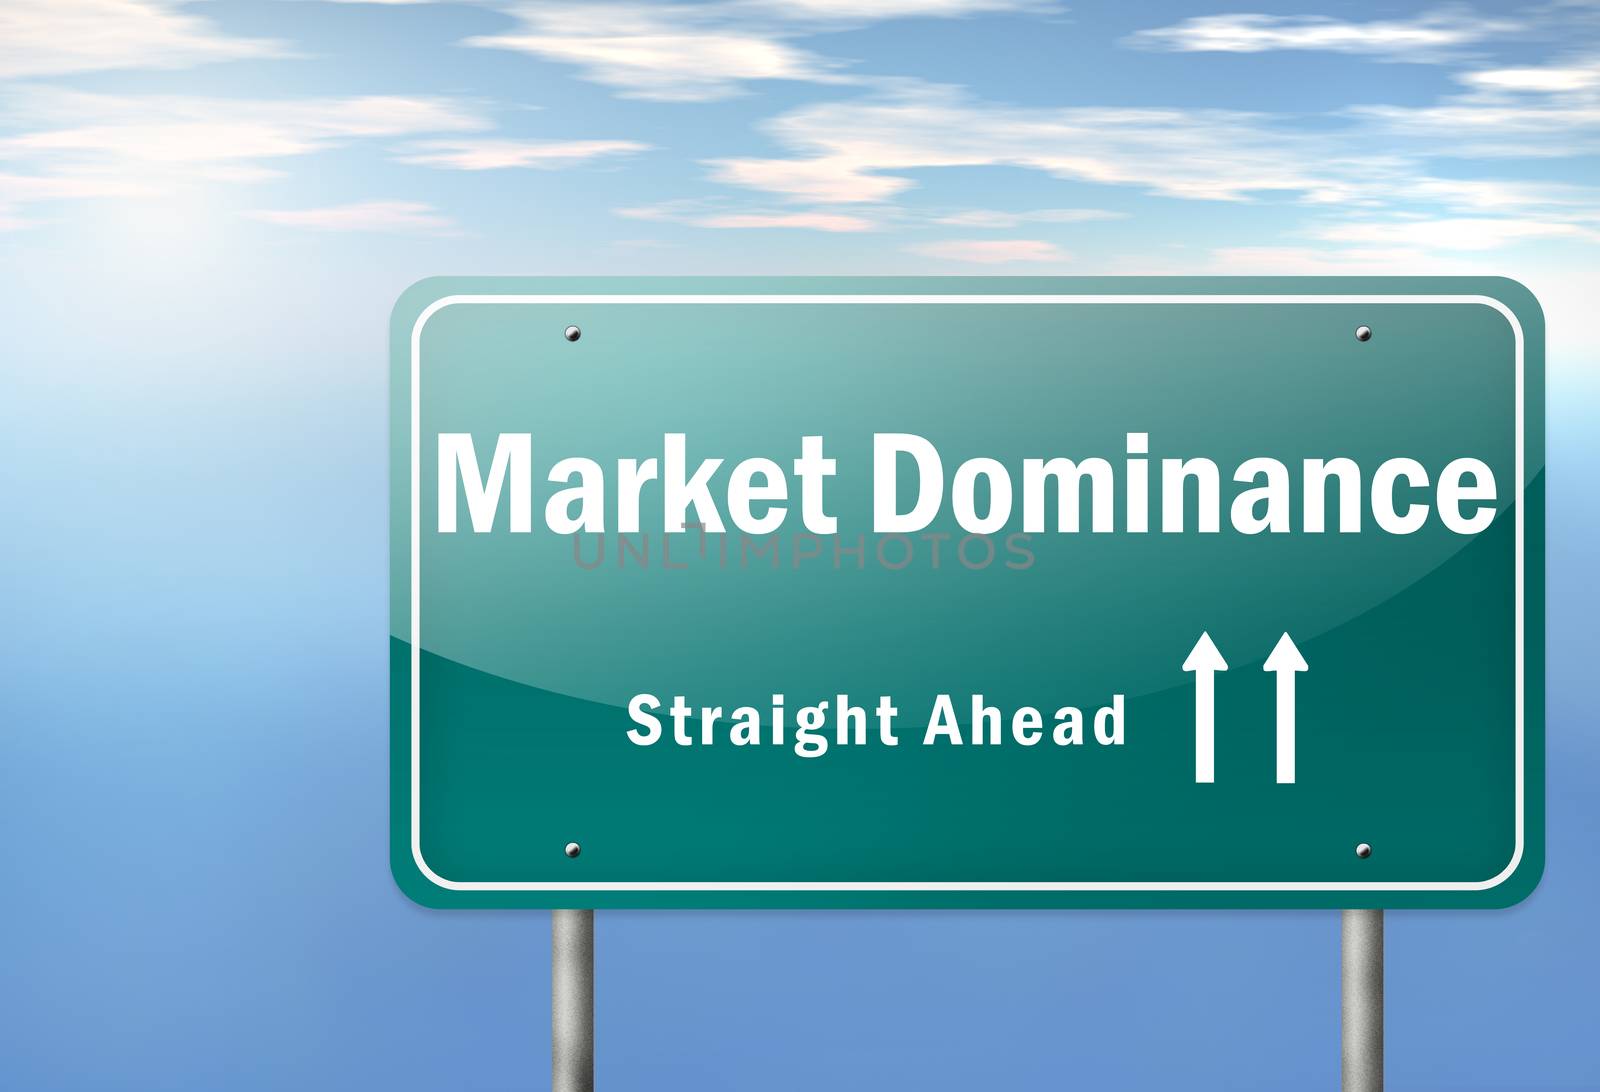 Highway Signpost with Market Dominance wording